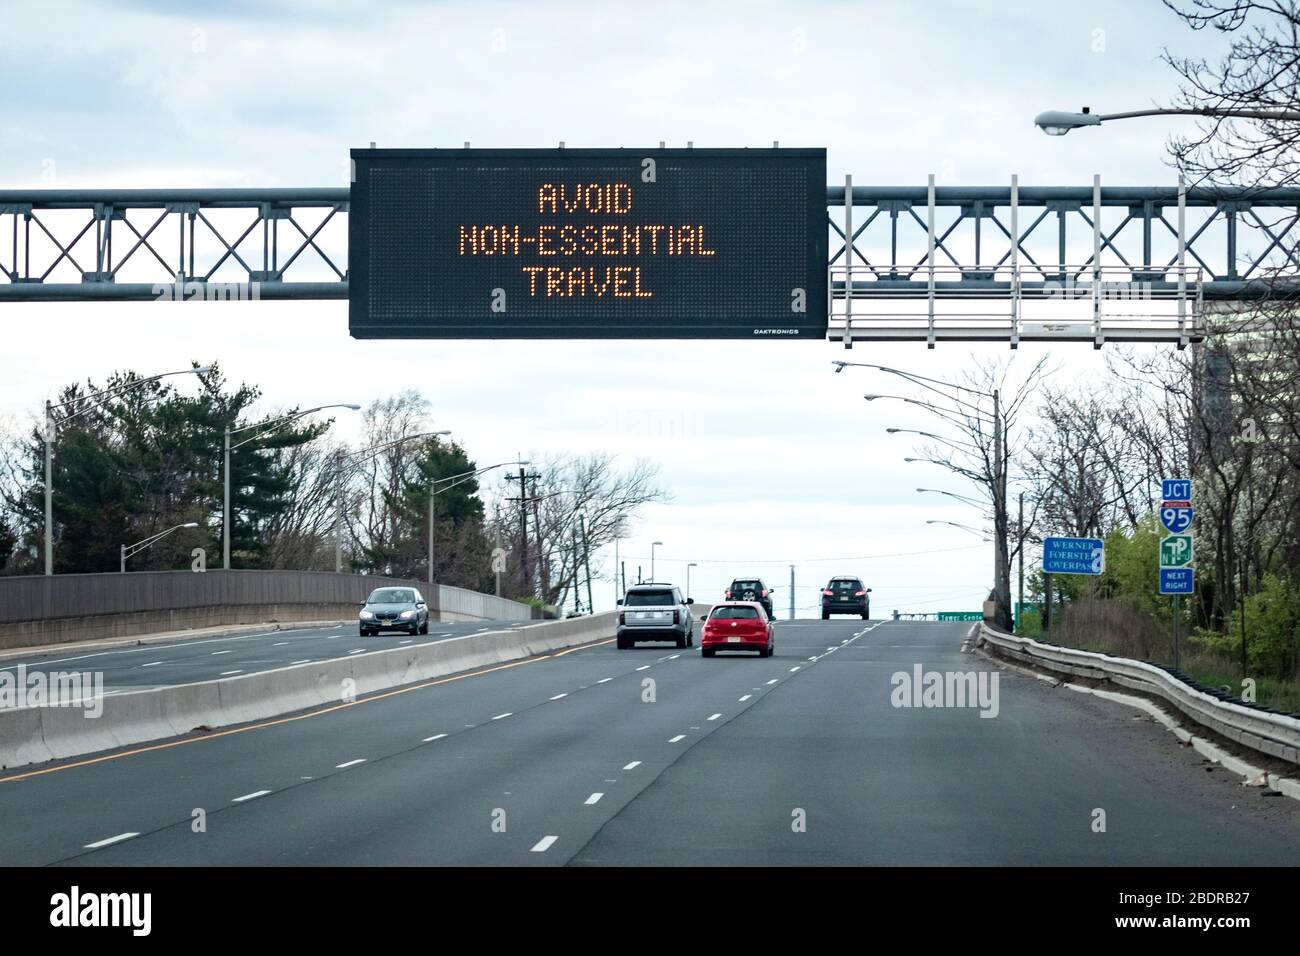 'AVOID NON-ESSENTIAL TRAVEL' message on an electronic traffic message sign, above highway and cars during COVID-19 pandemic Stock Photo